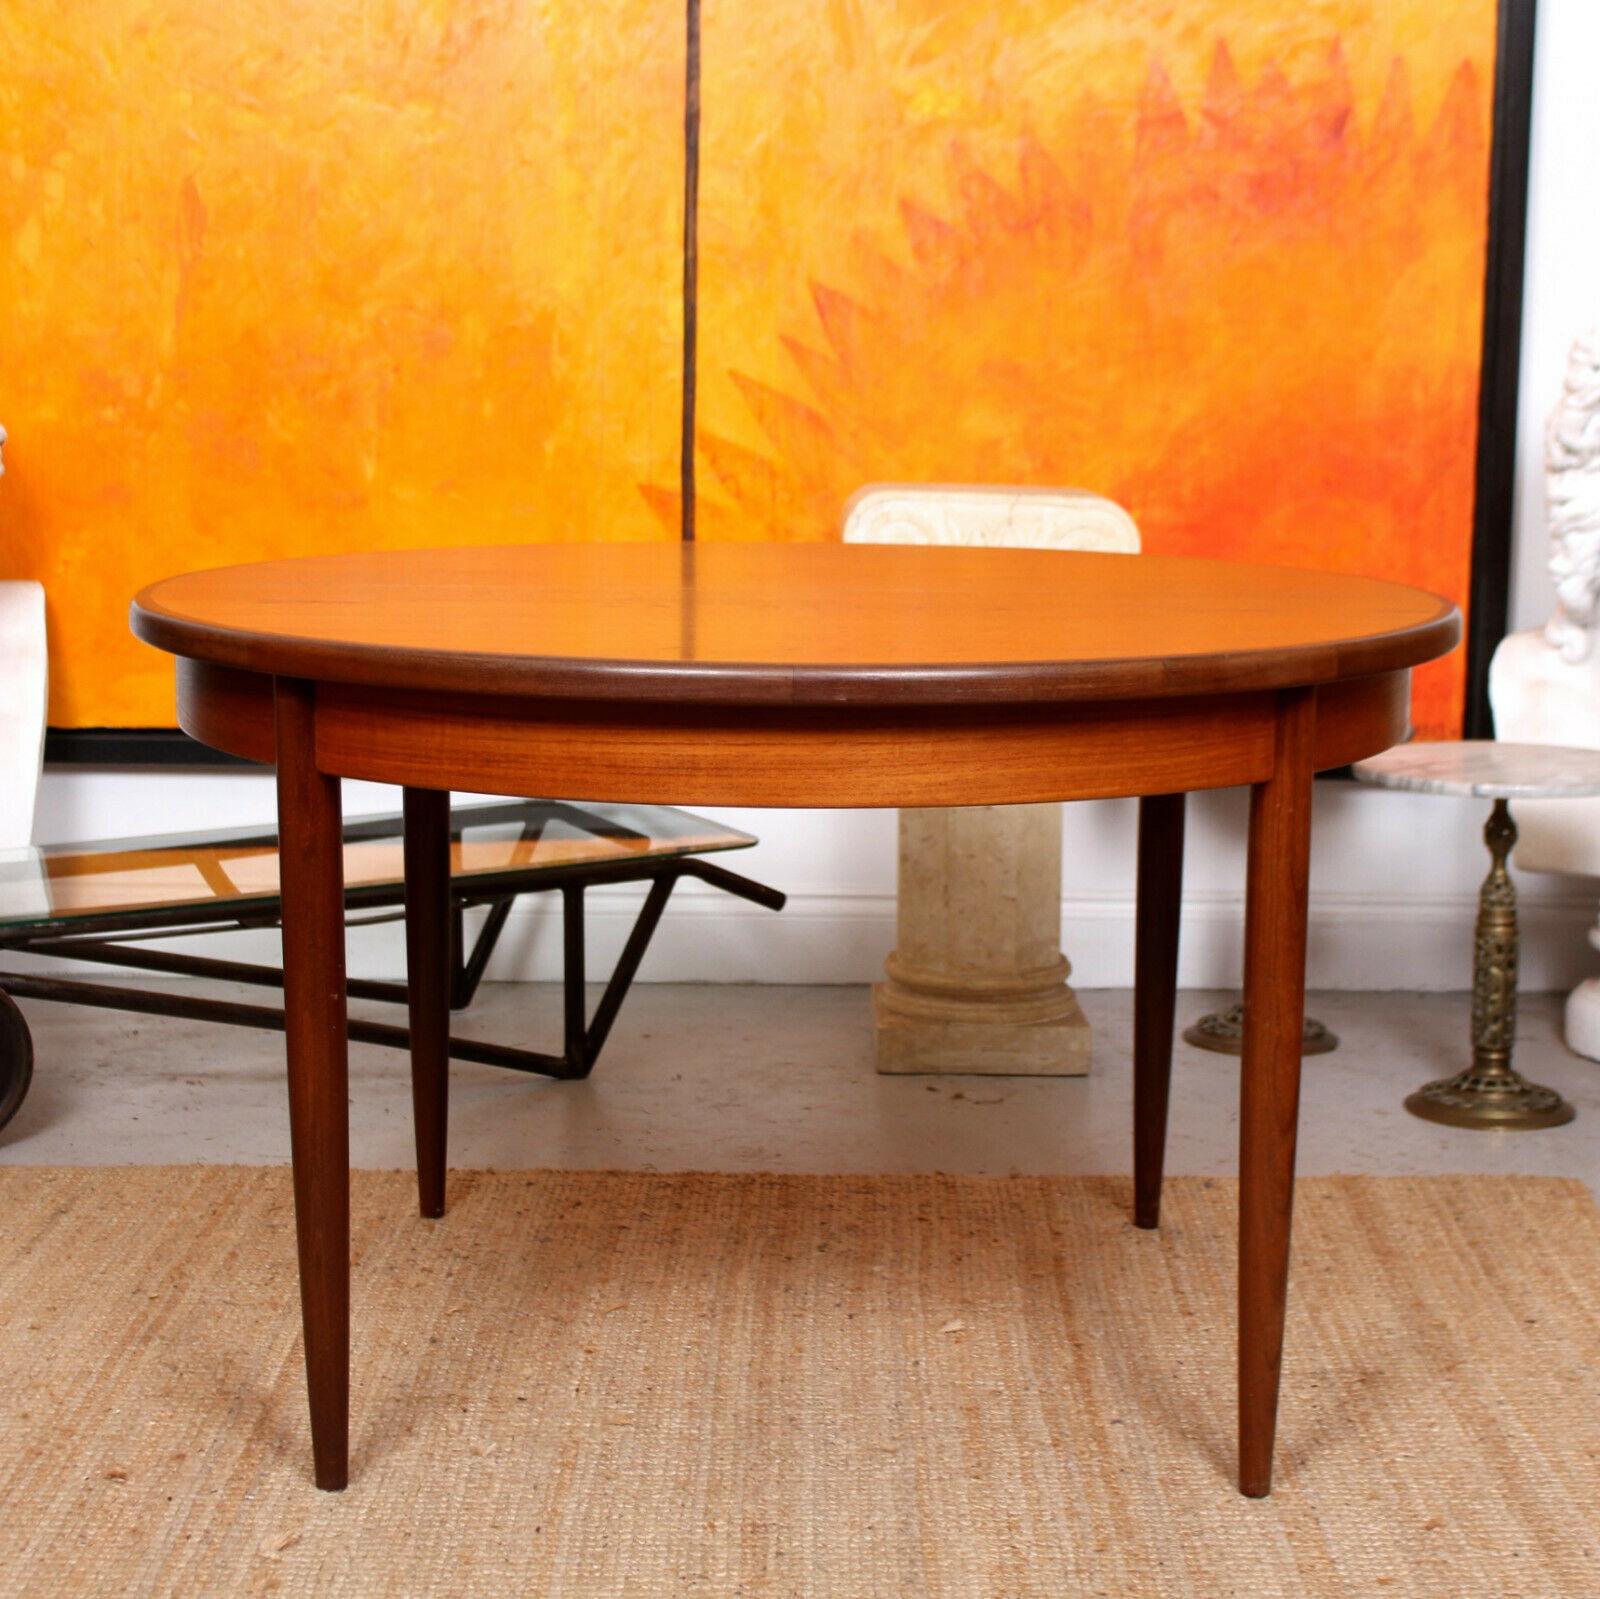 An impressive mid-20th century extending teak dining table by G Plan offered in good condition,
England, circa 1970.